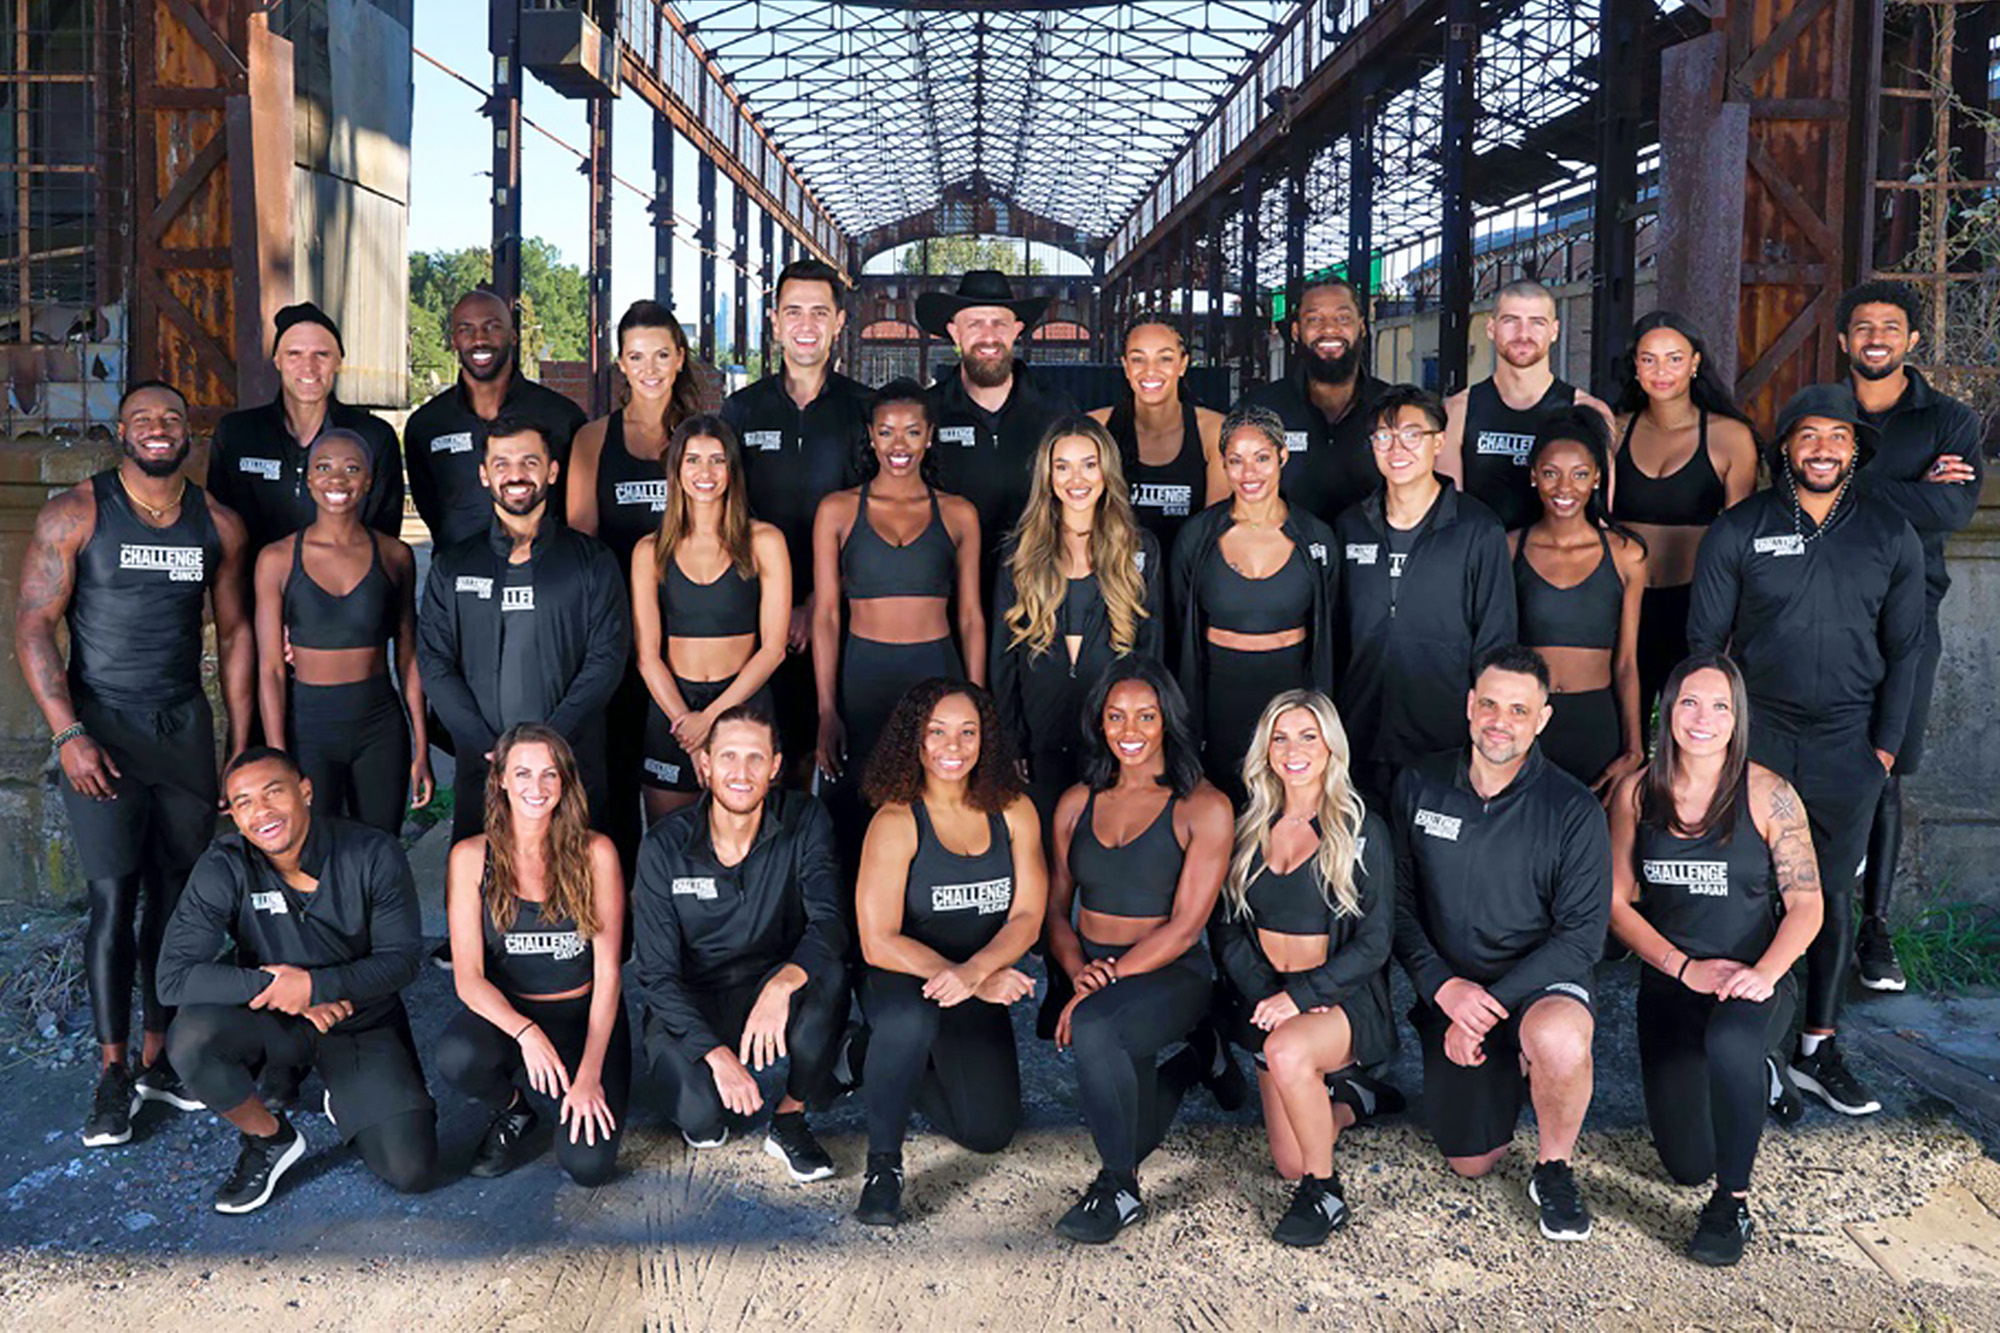 When To Expect The Challenge Season 38 Release Date? -